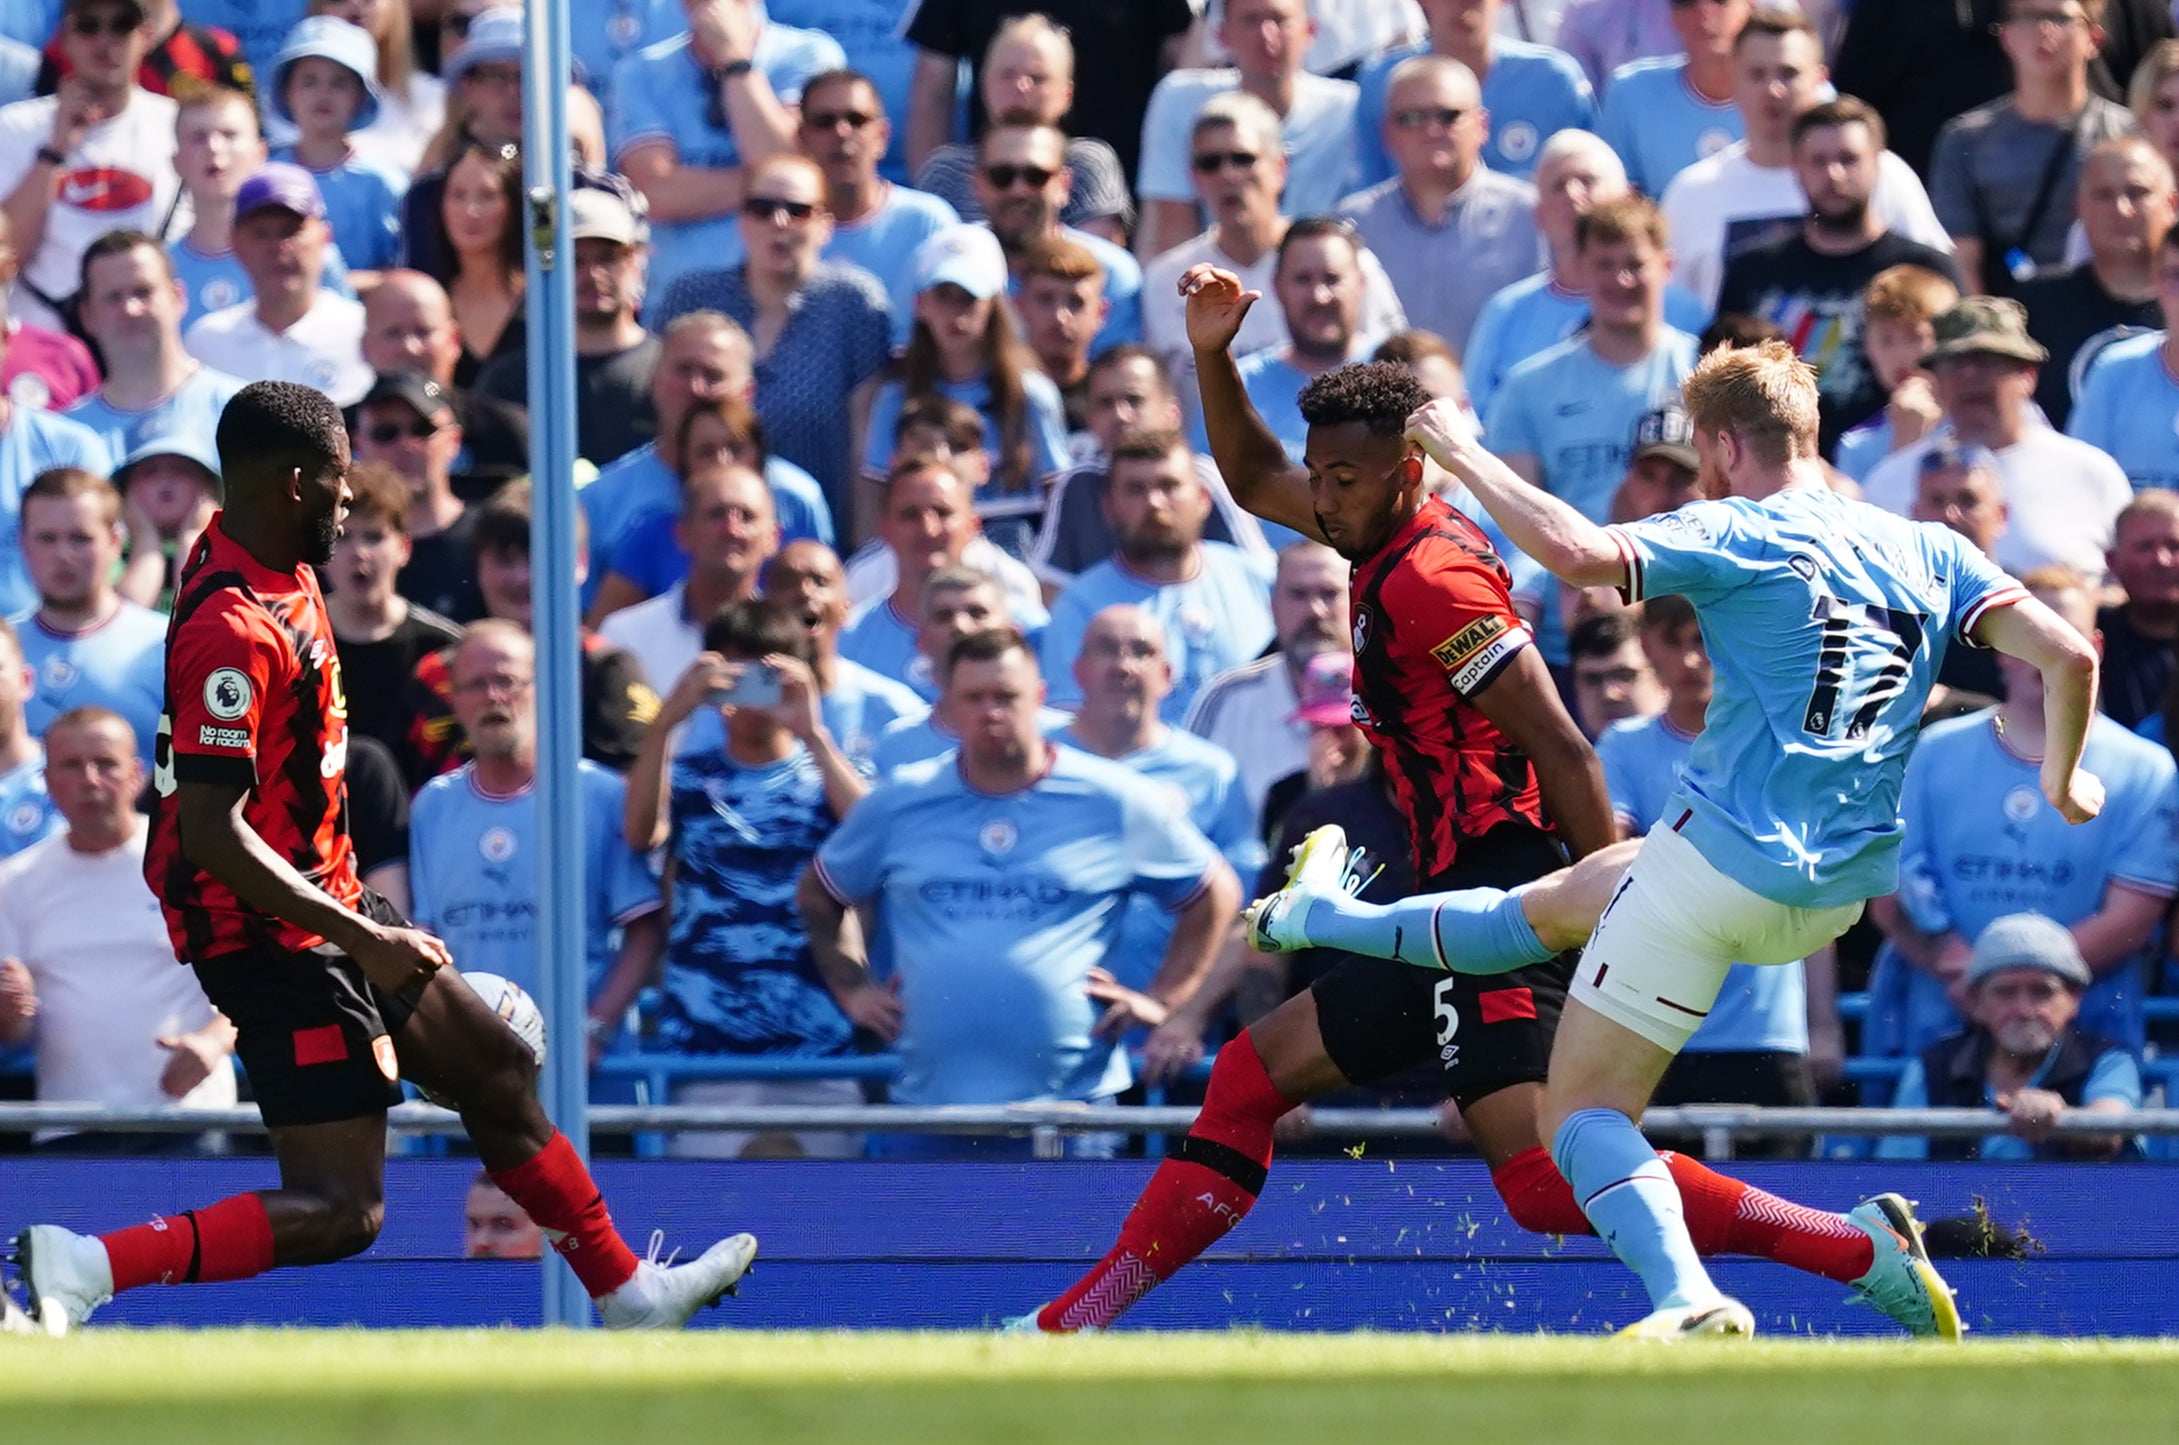 Manchester City’s Kevin de Bruyne scores his side’s second goal against Bournemouth (Martin Rickett/PA)